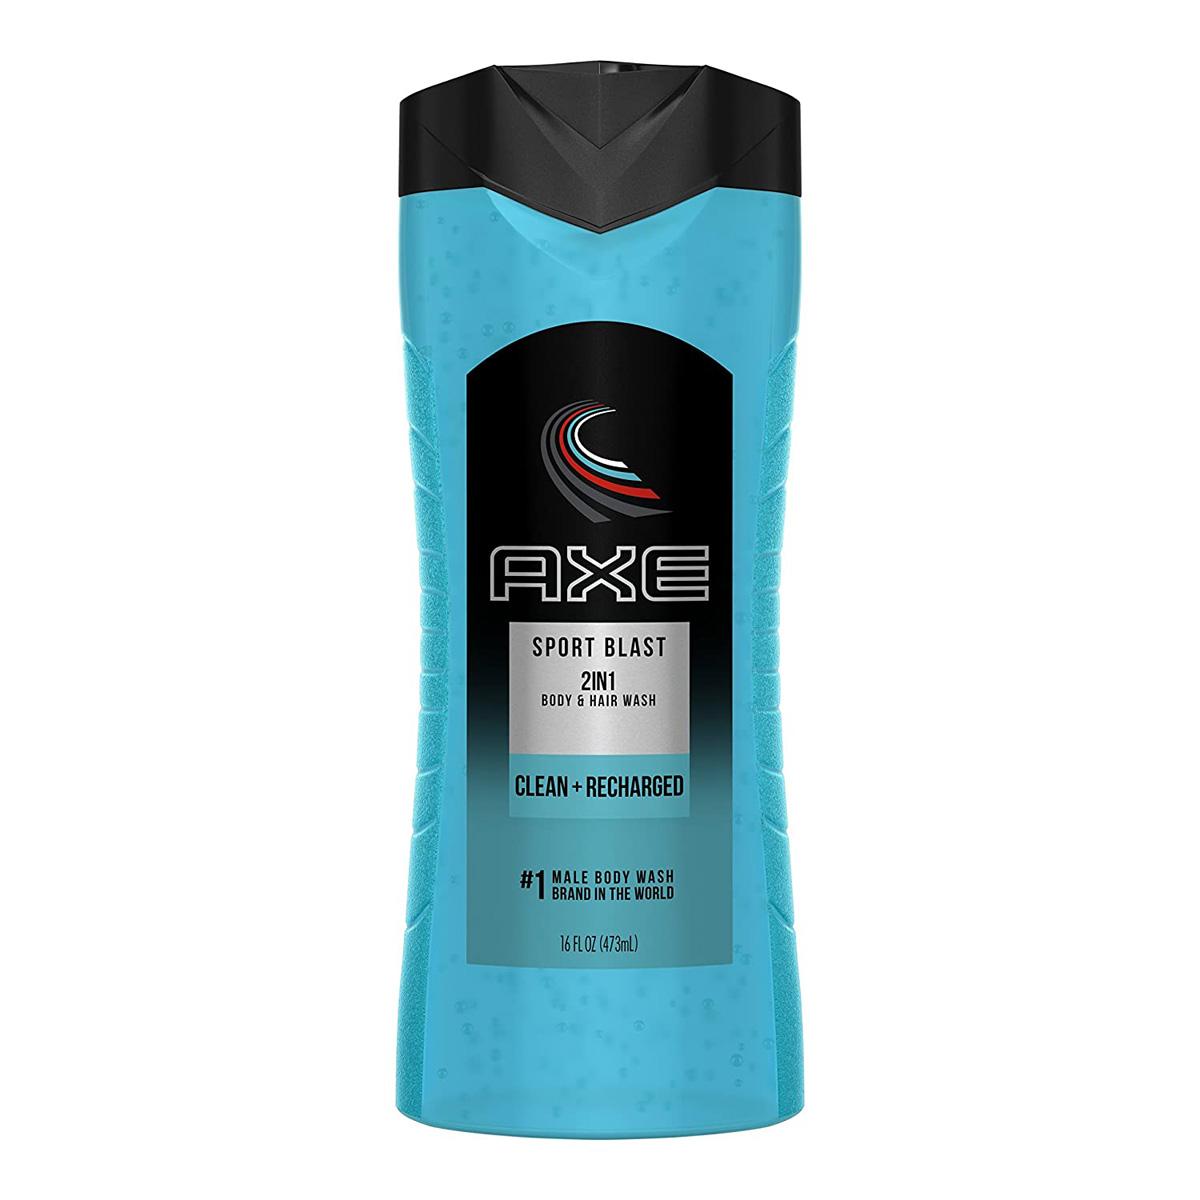 4 AXE 2 in 1 Body Wash and Shampoo for Men for $10.16 Shipped